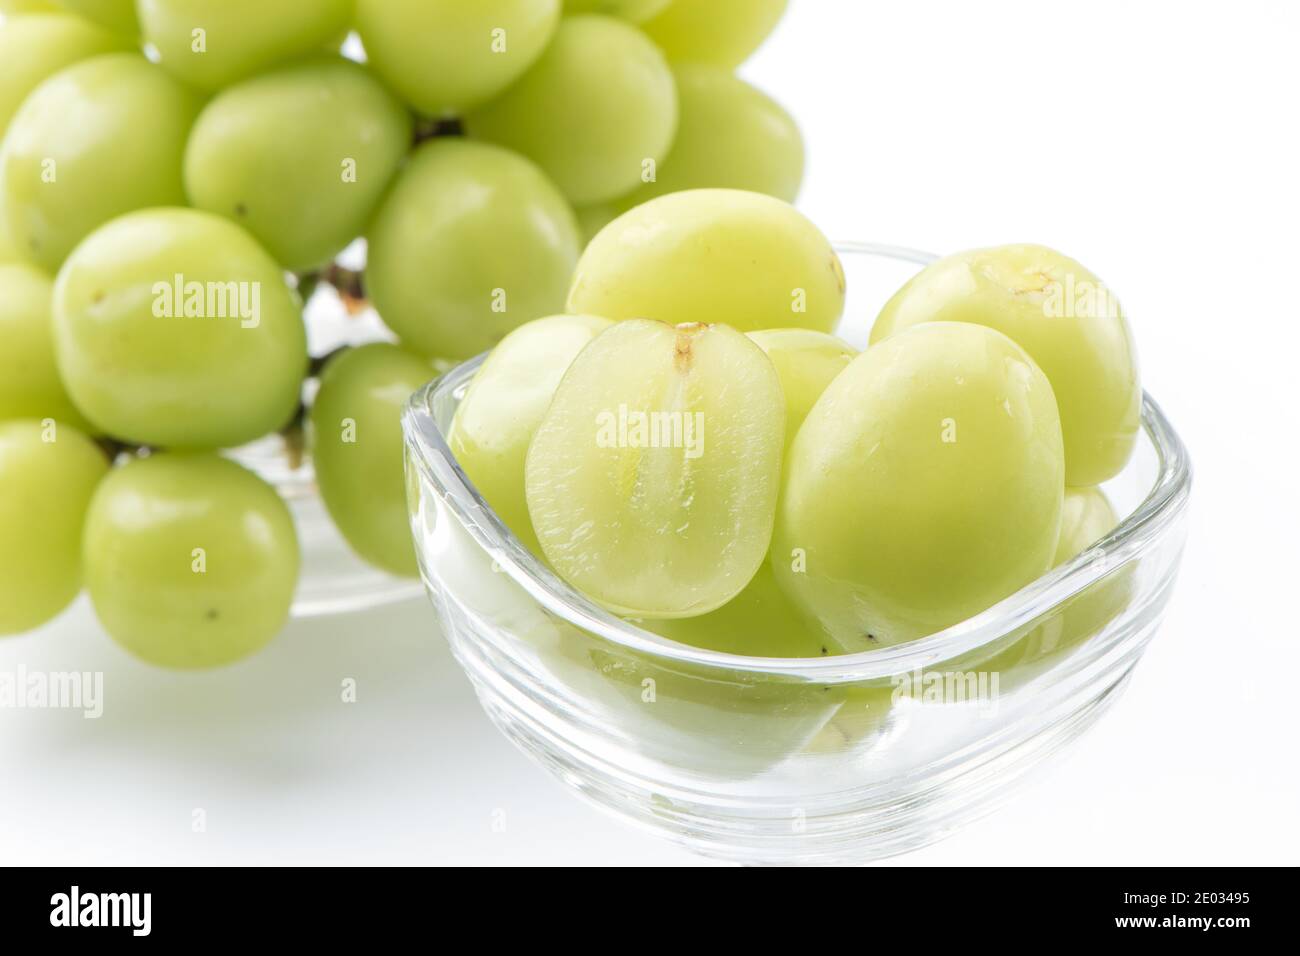 https://c8.alamy.com/comp/2E03495/close-up-of-beautiful-boxed-shrine-muscat-green-grape-isolated-on-white-background-clipping-path-cut-out-2E03495.jpg